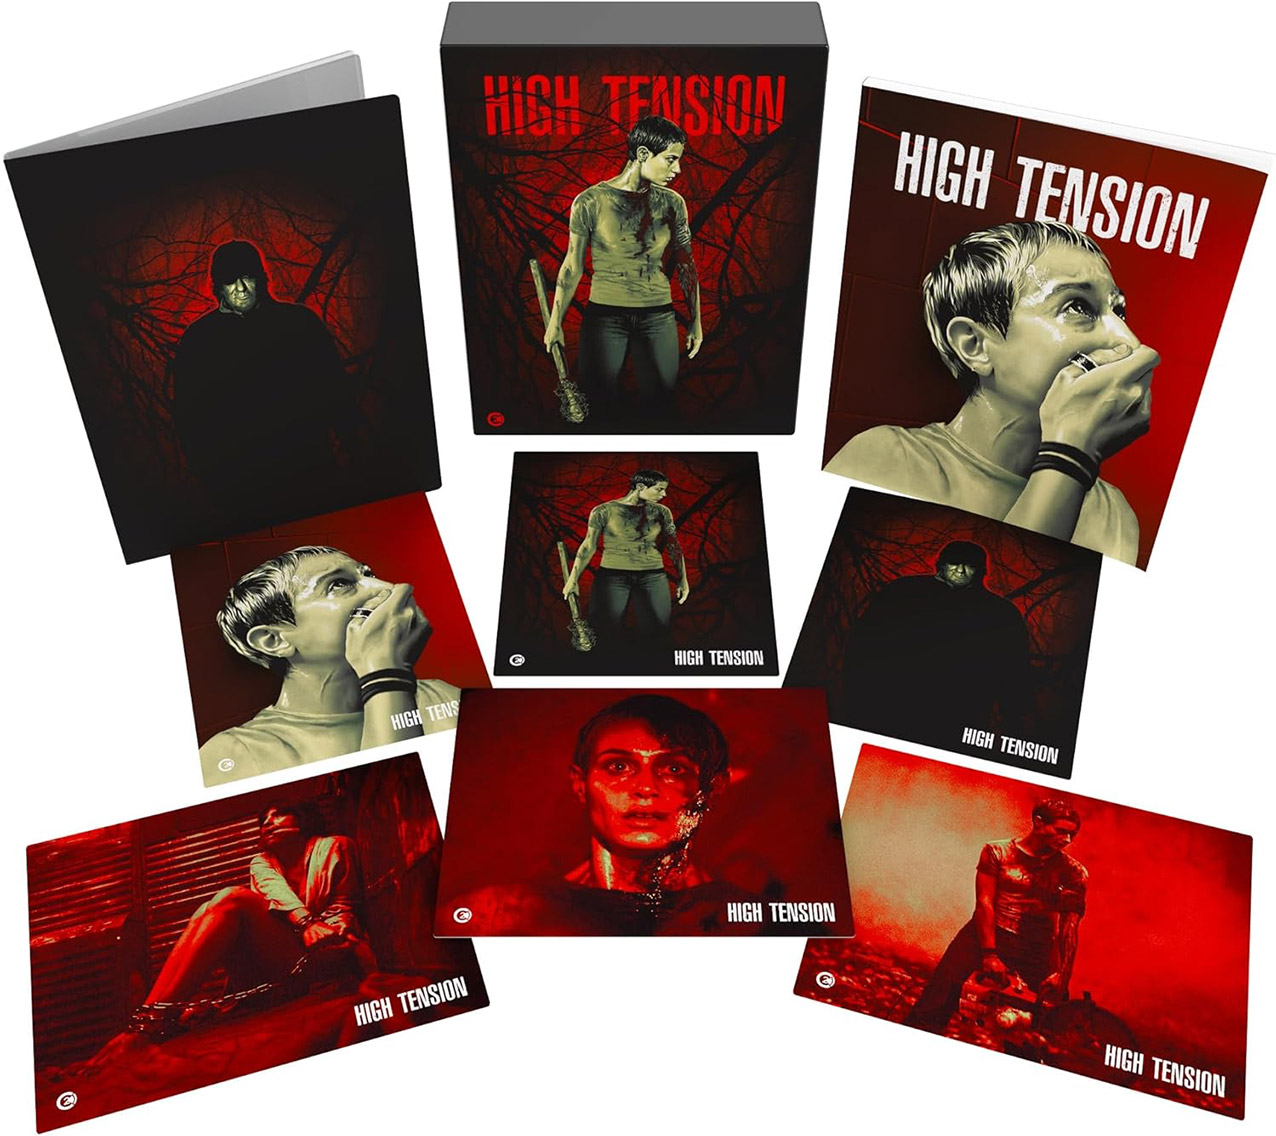 High Tension Limited Edition Blu-ray pack shot